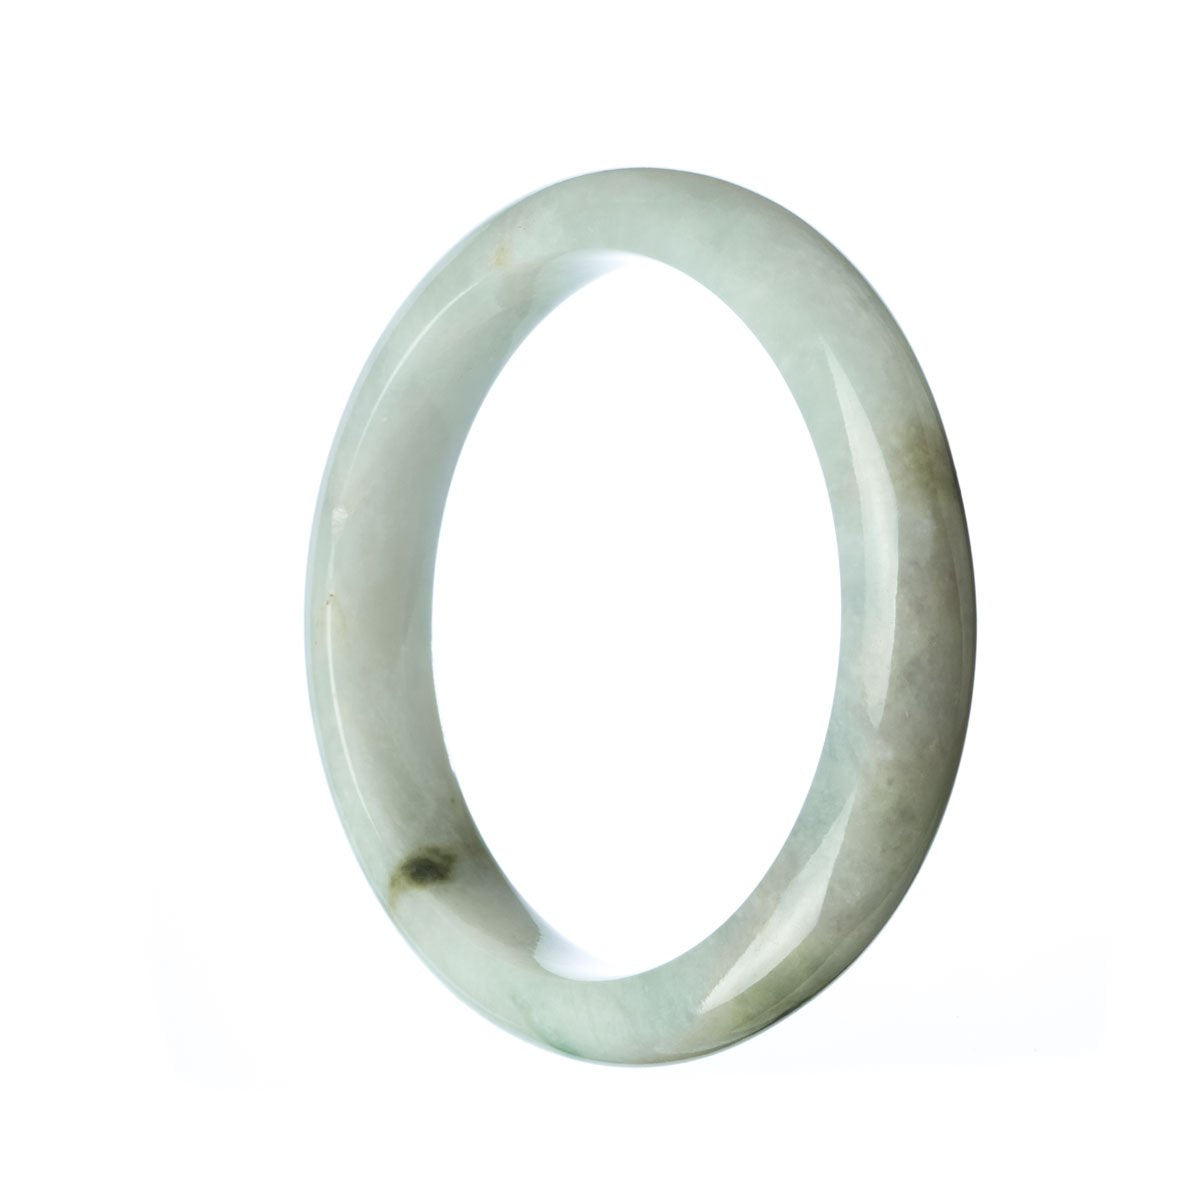 A white jade bangle bracelet, made from genuine Grade A white jadeite jade. The bracelet has a semi-round shape and measures 59mm in diameter. It is a beautiful piece of jewelry from the brand MAYS.